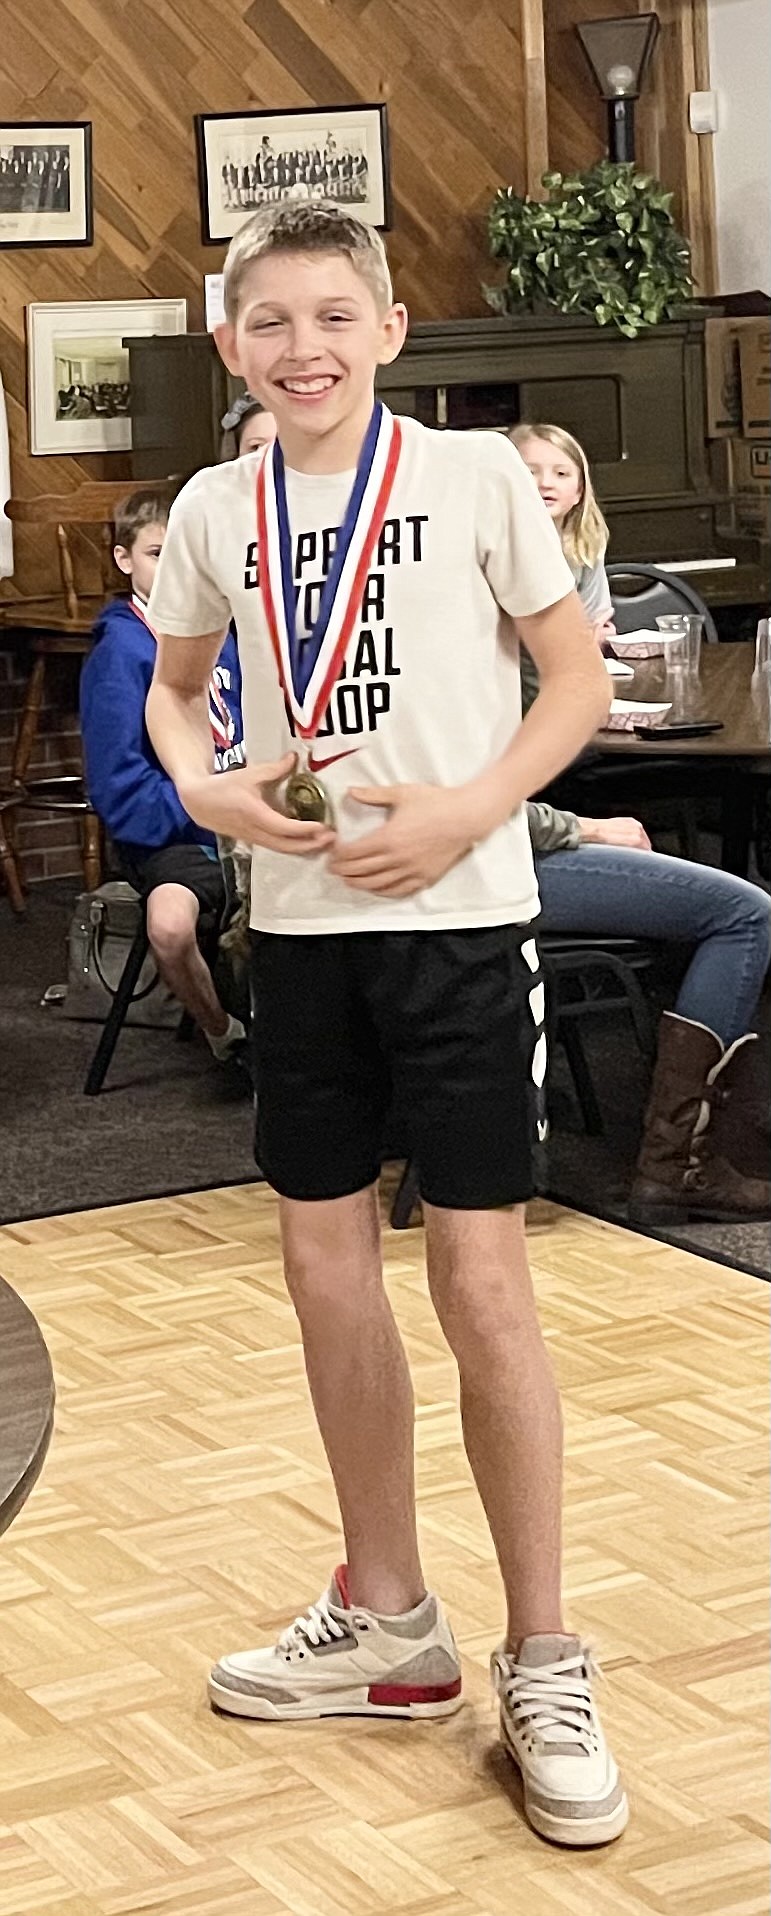 Courtesy photo
Micah Hodges won the boys 12-13 age division at the Coeur d'Alene Elks Hoop Shoot held Feb. 20 at The Courts at Real Life in Post Falls.